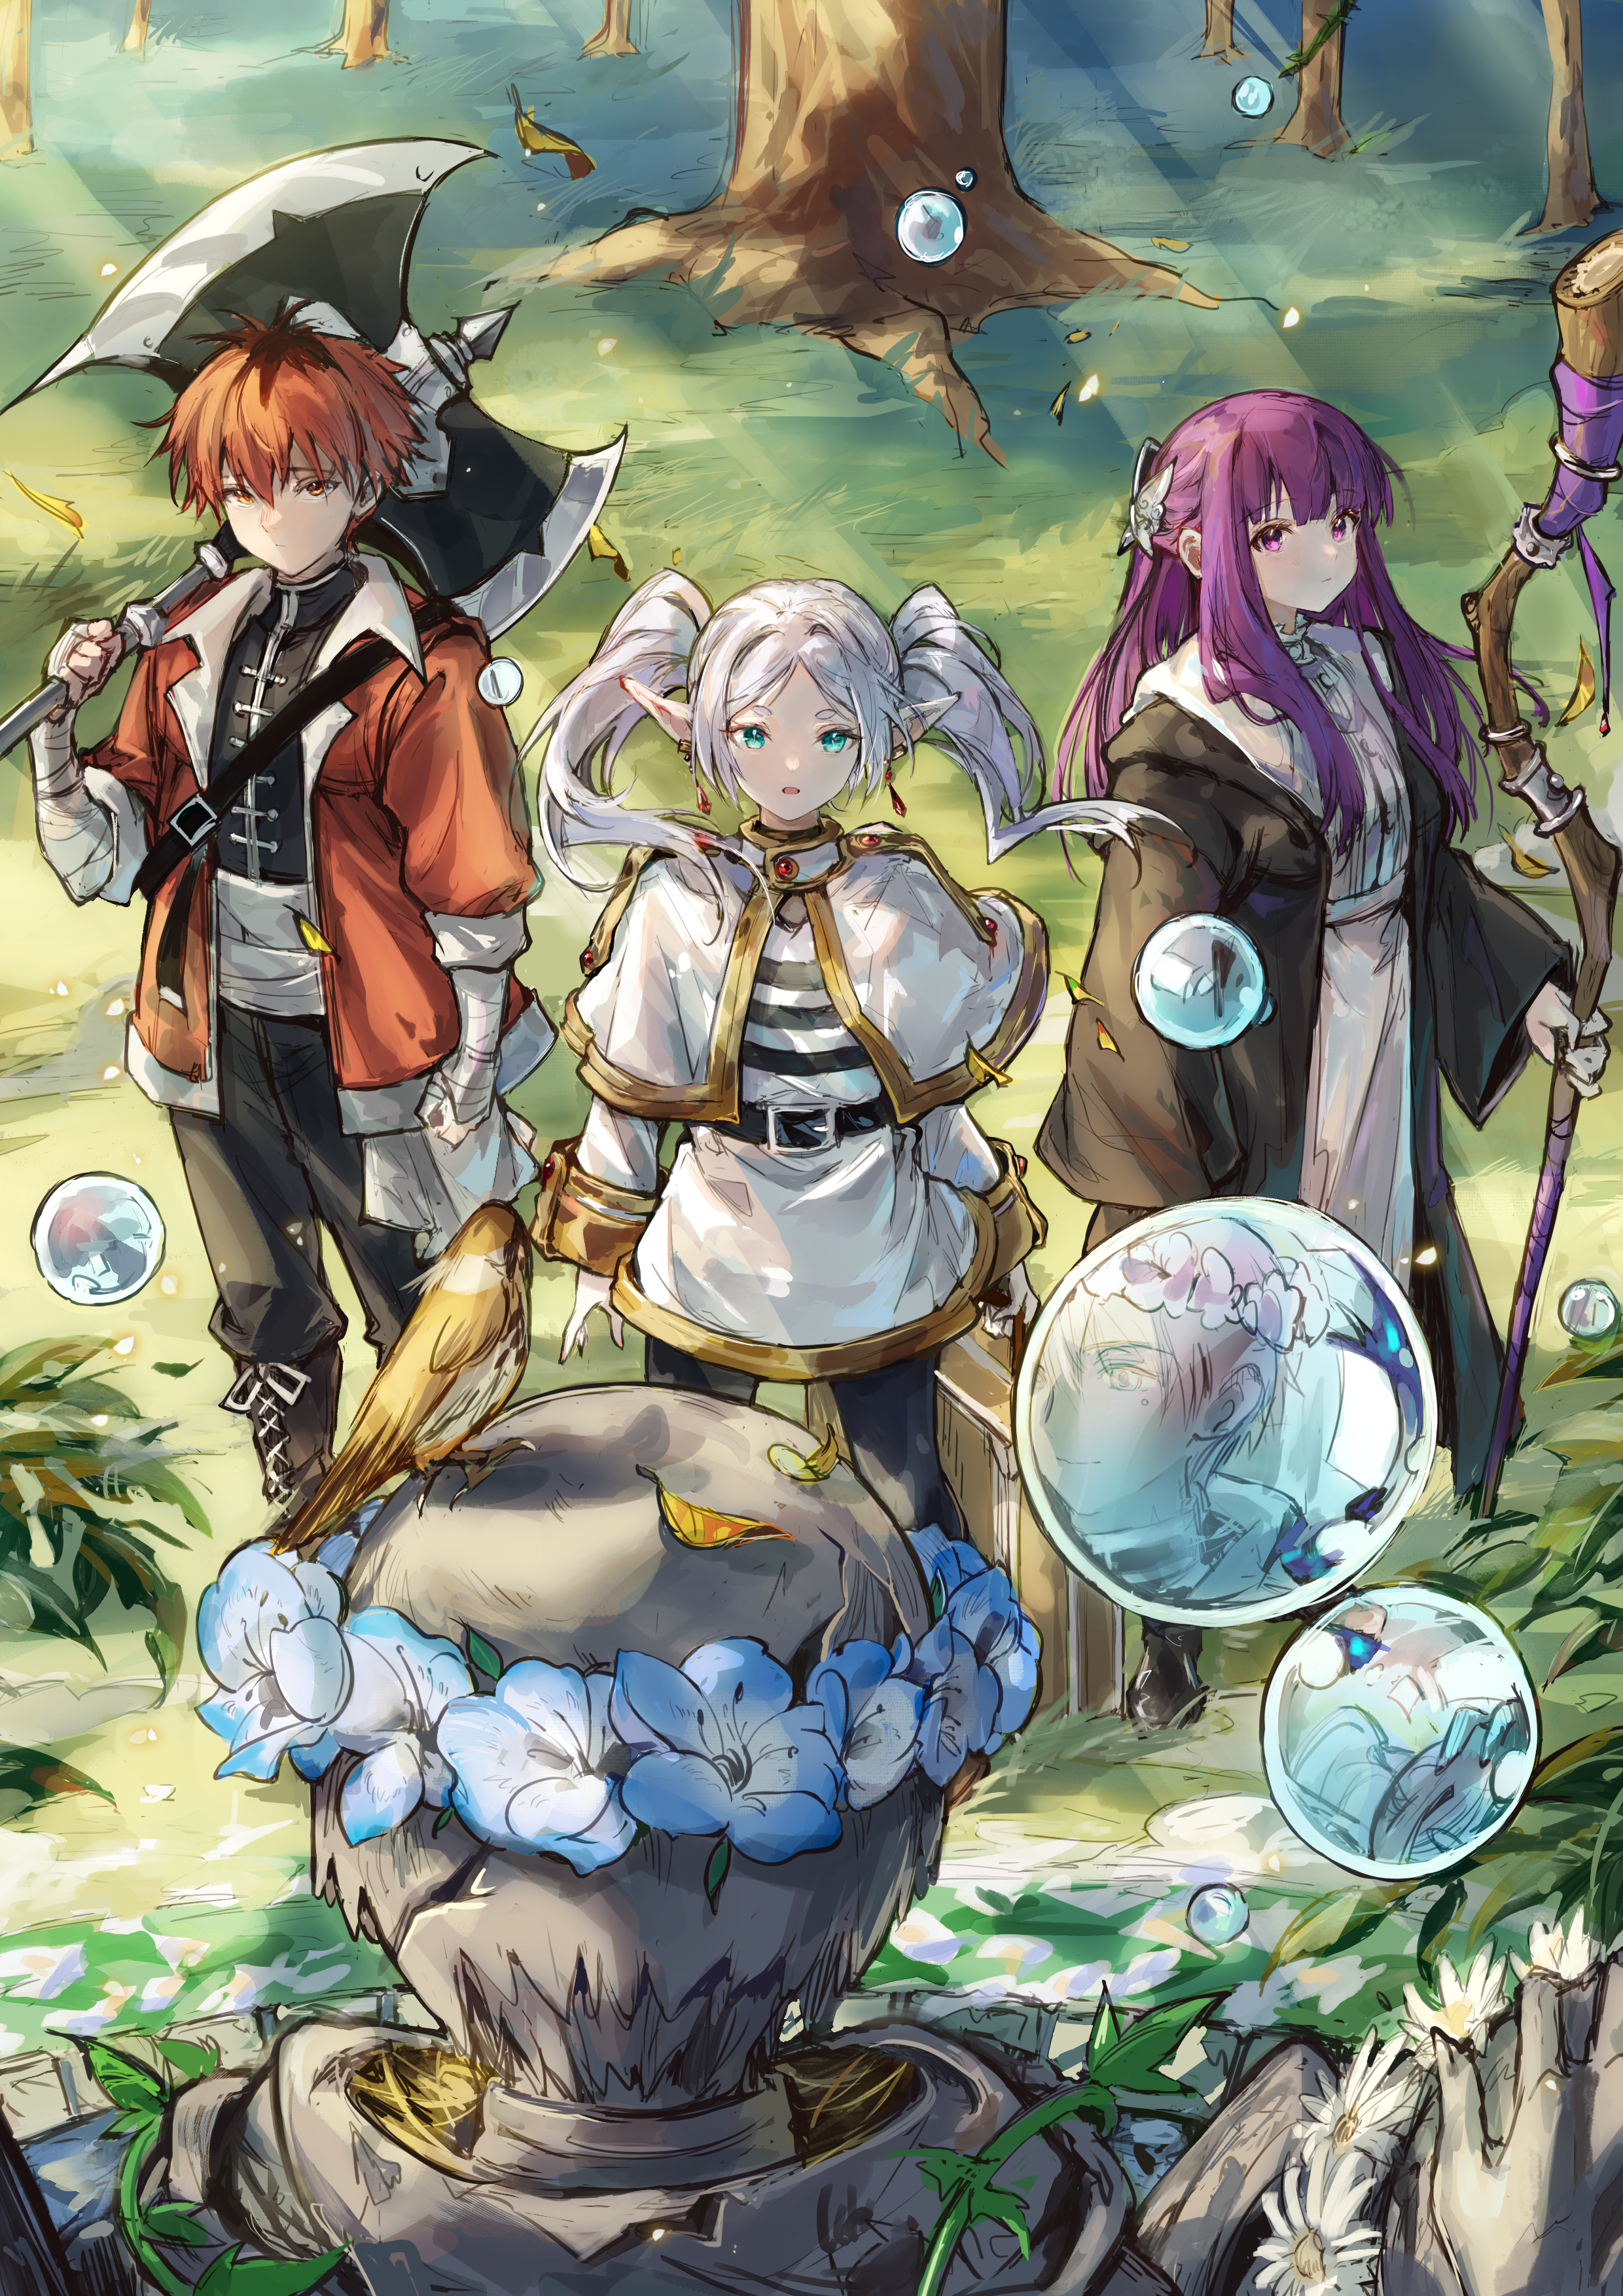 Anime 2480x3508 Sousou No Frieren elves portrait display anime girls anime boys pointy ears Frieren Himmel (Sousou no Frieren) Fern (Sousou No Frieren) Stark (Sousou no Frieren) looking at viewer nature outdoors standing blue flowers flower crown weapon striped shirt staff axes bubbles birds grass trees statue leaves vines a yue nests gems